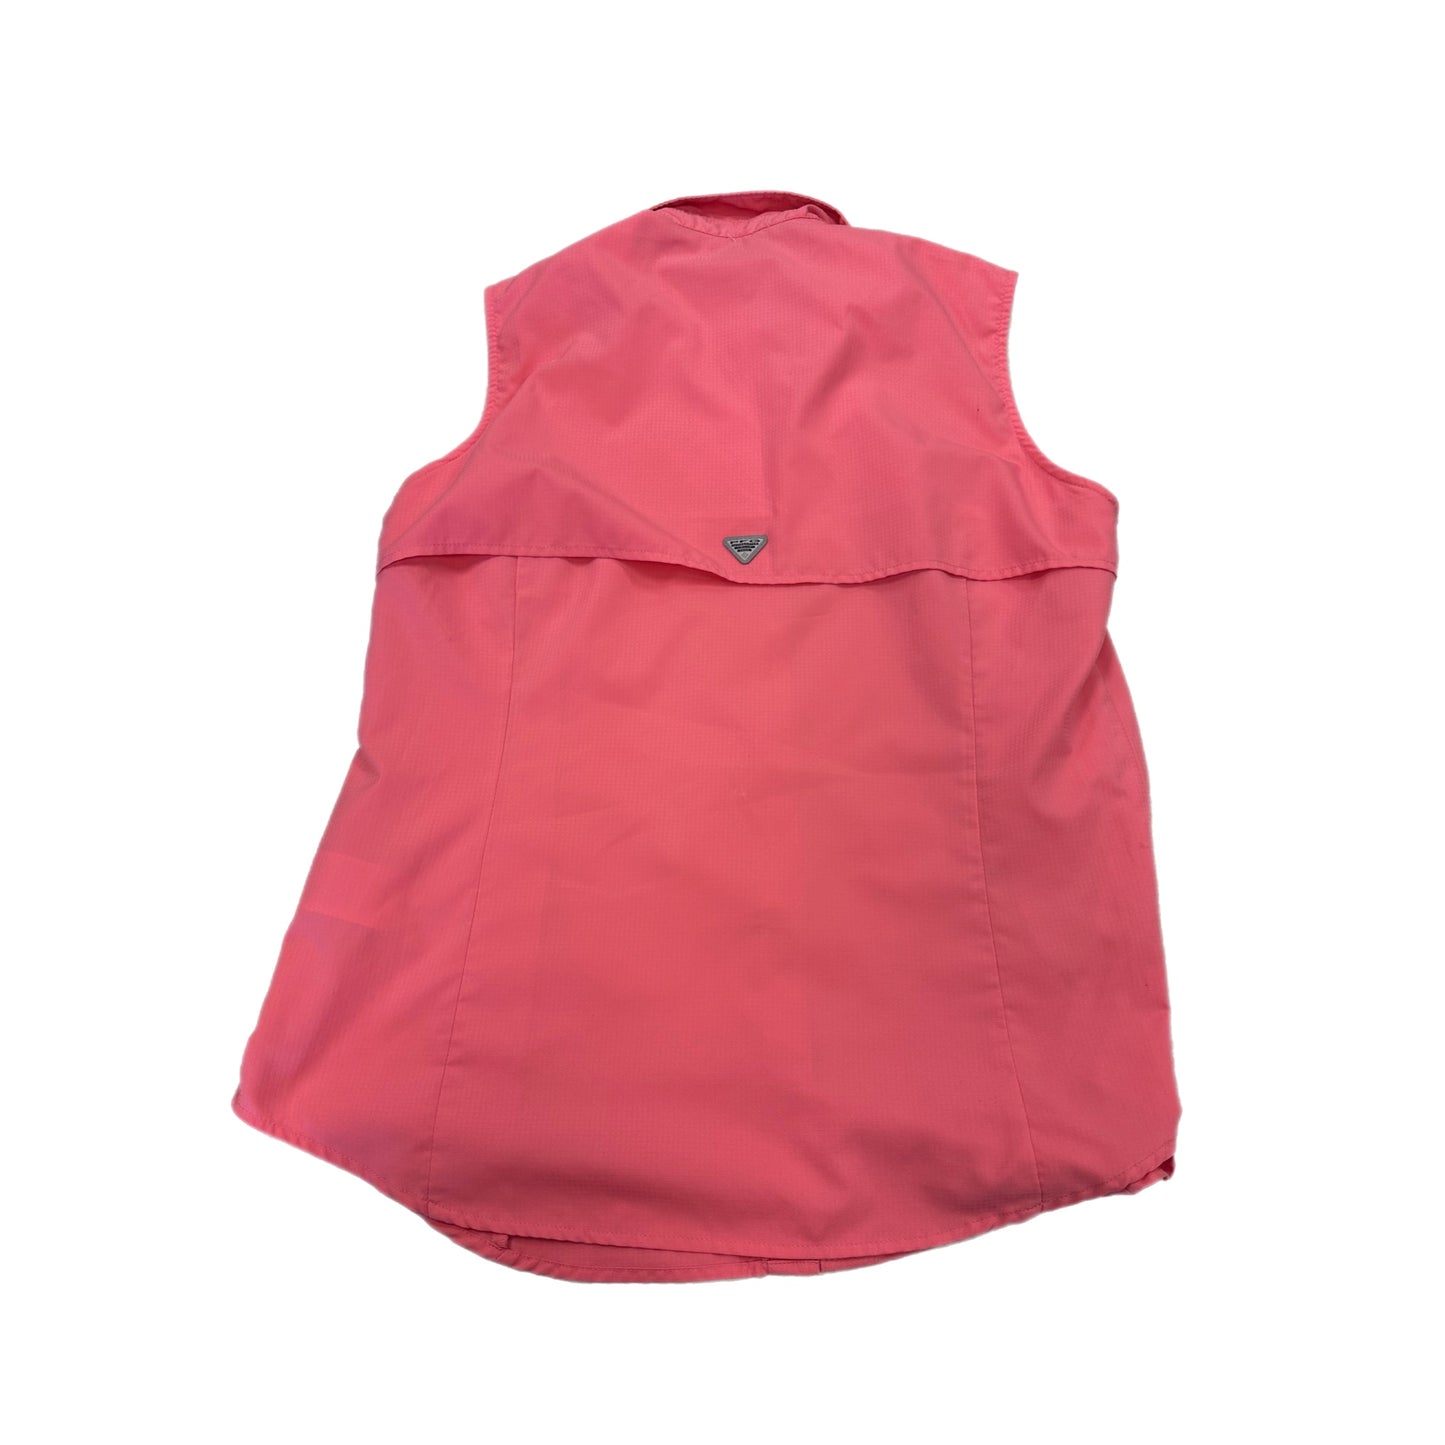 Top Sleeveless By Columbia  Size: S